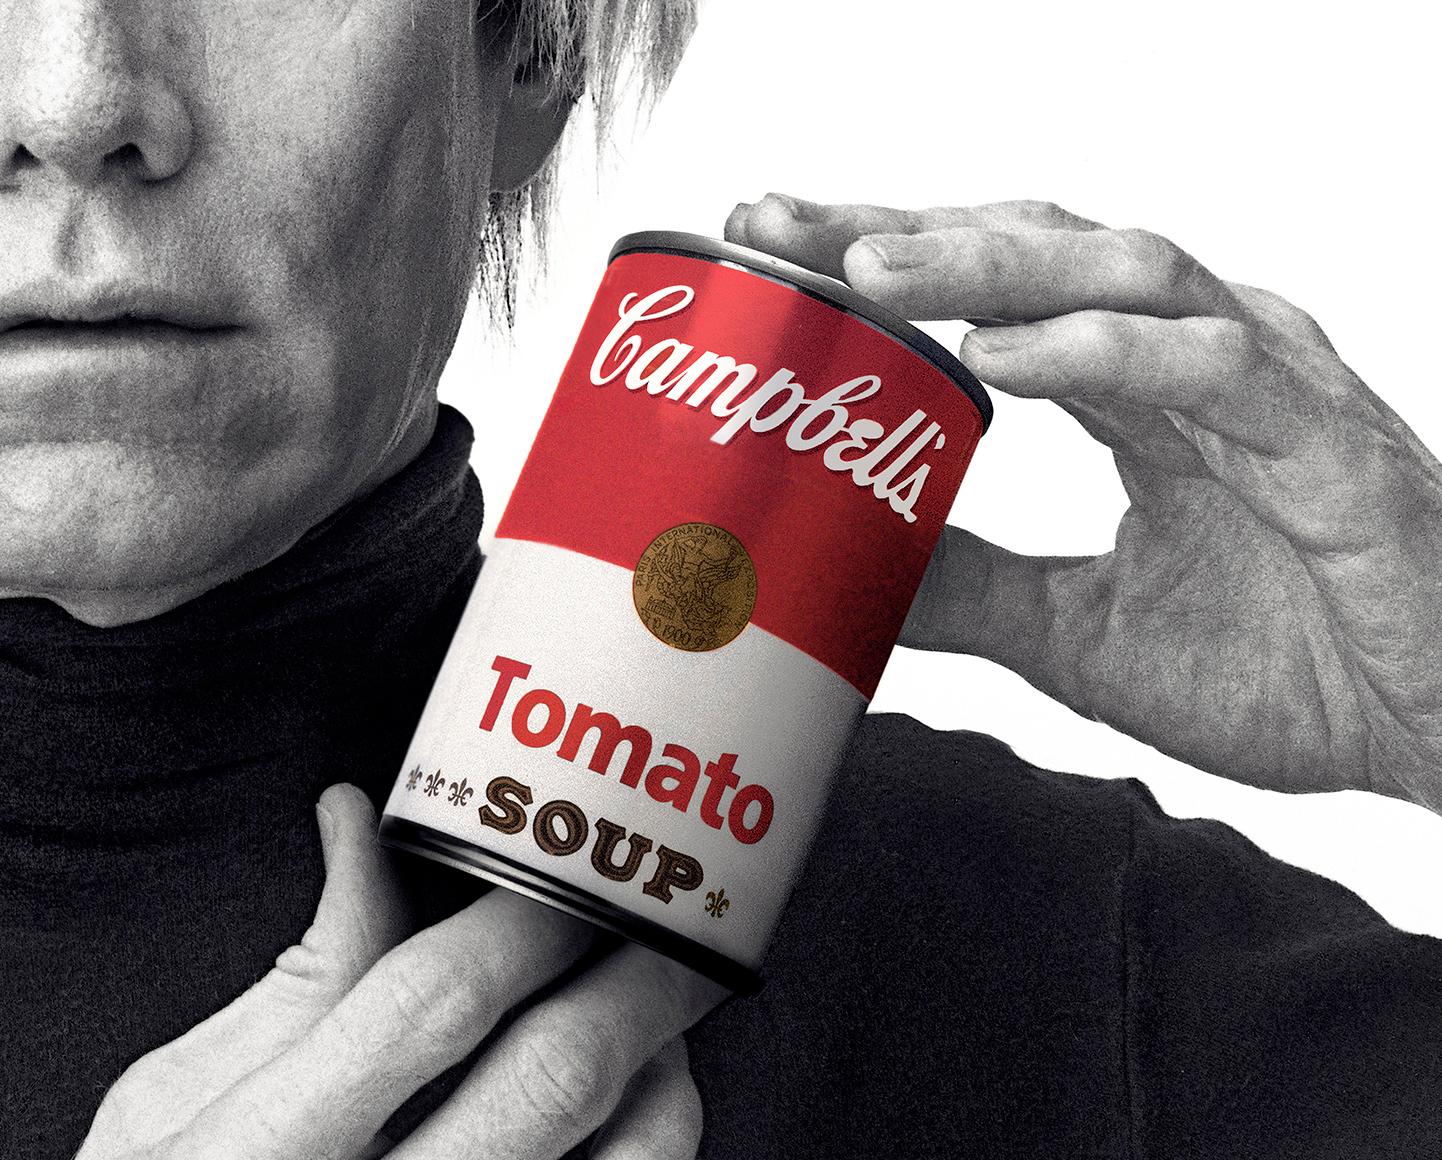 Andrew Unangst, Archival 'Andy Warhol with Red Campbell's Soup', 2020 For Sale 3